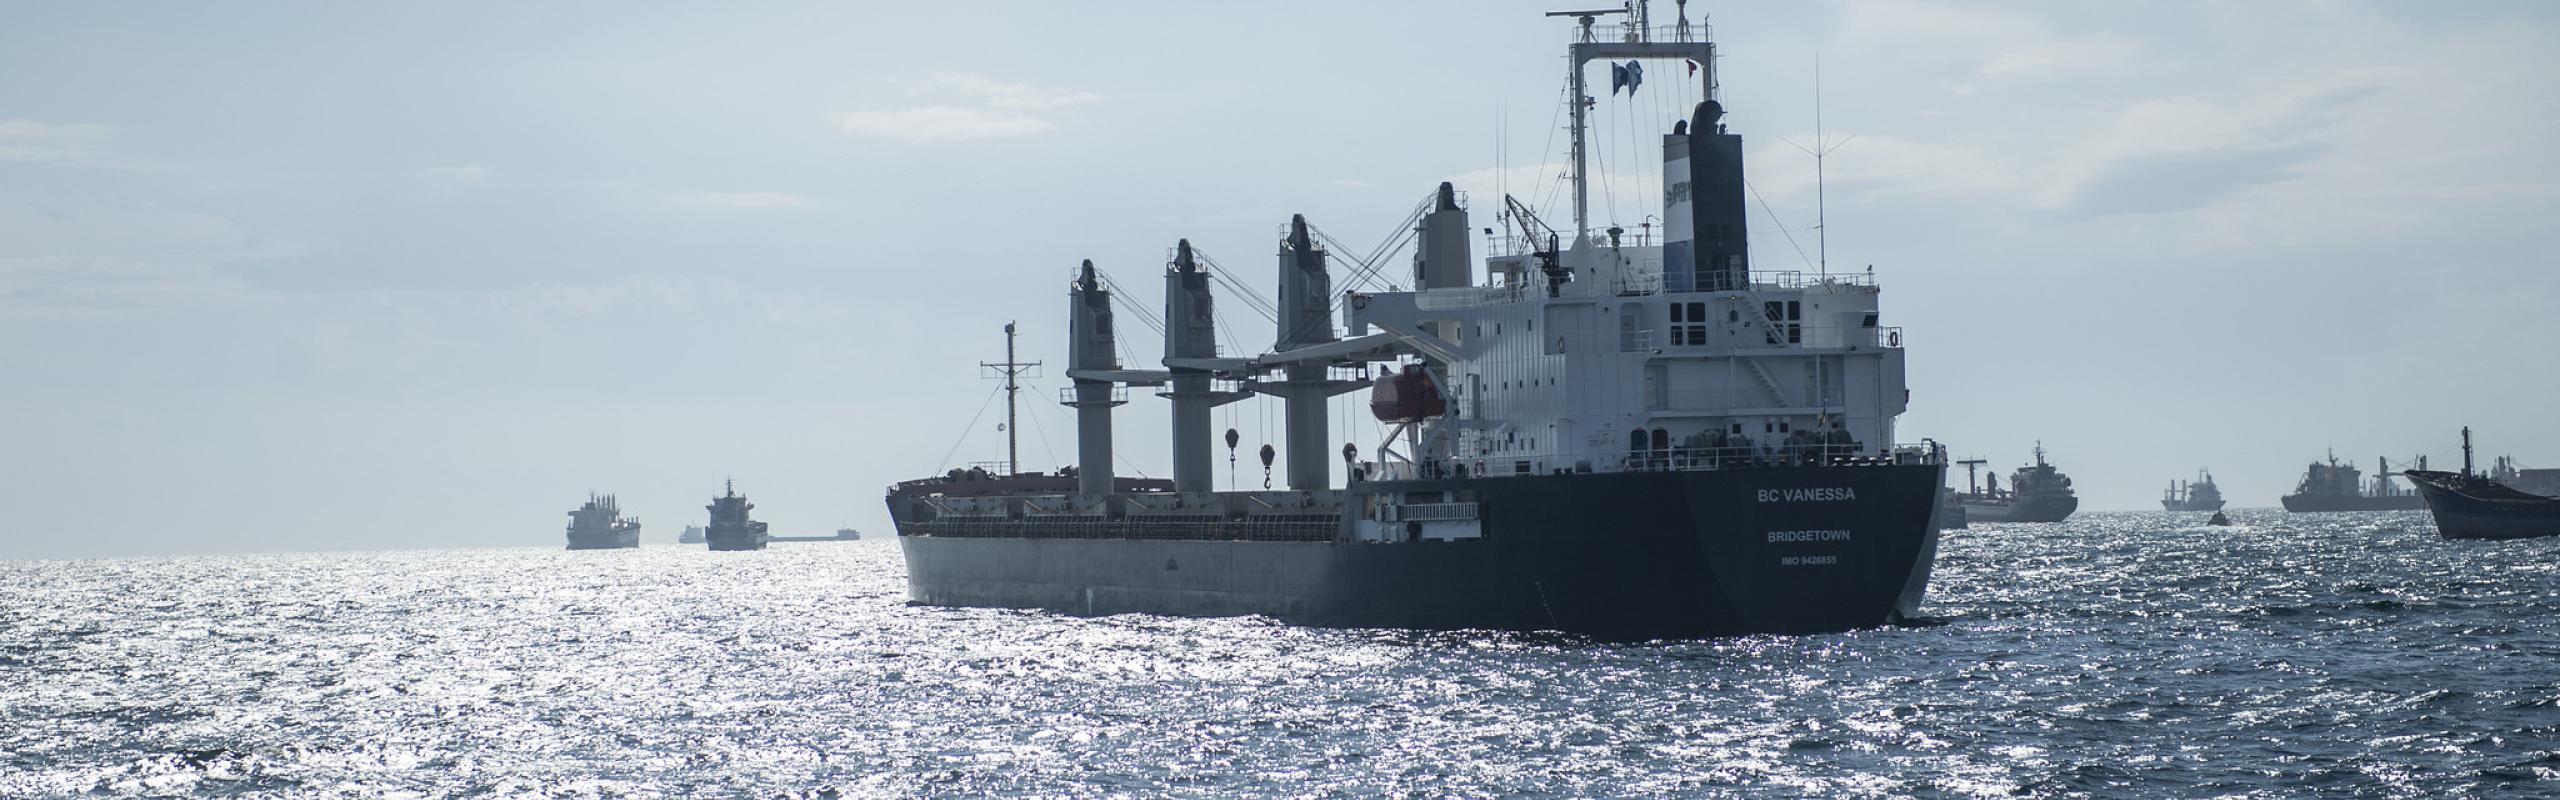 The BC Vanessa, a WFP-chartered vessel carrying Ukrainian grain destined for Afghanistan under the Black Sea Grain Initiative, in the Marmara Sea, awaiting inspection at the Joint Coordination Centre, Istanbul, Türkiye, 28 September 2022